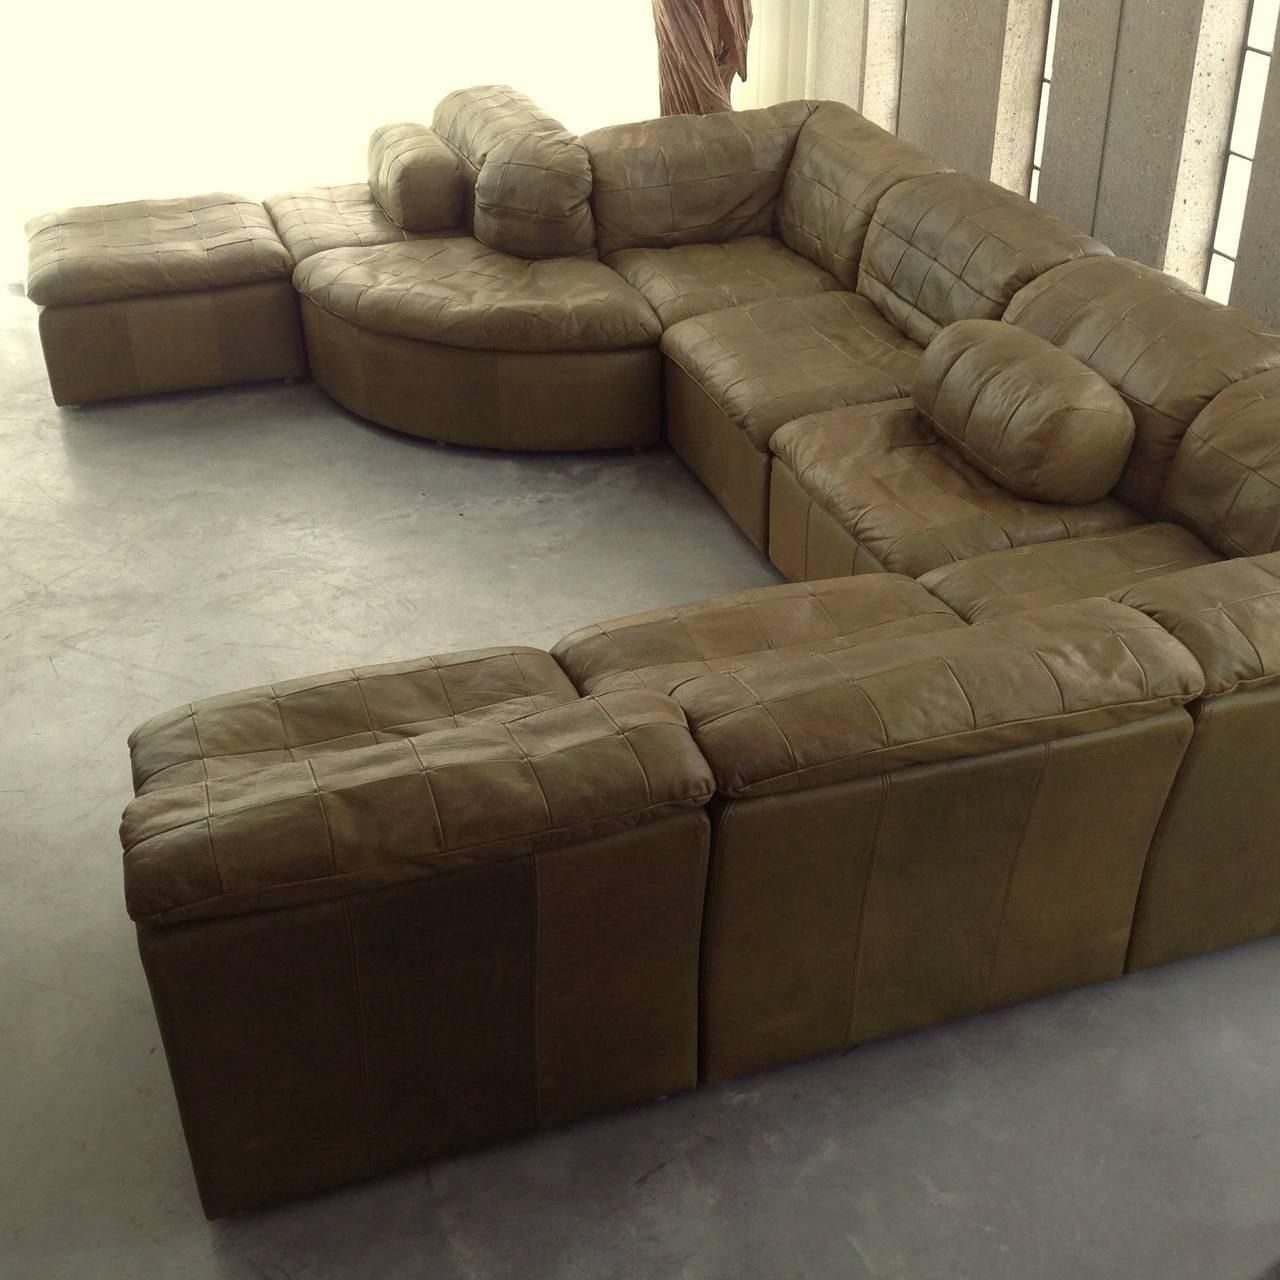 Green Leather Sectional Sofa With Design Image 29131 | Kengire Throughout Green Sectional Sofa (View 8 of 15)